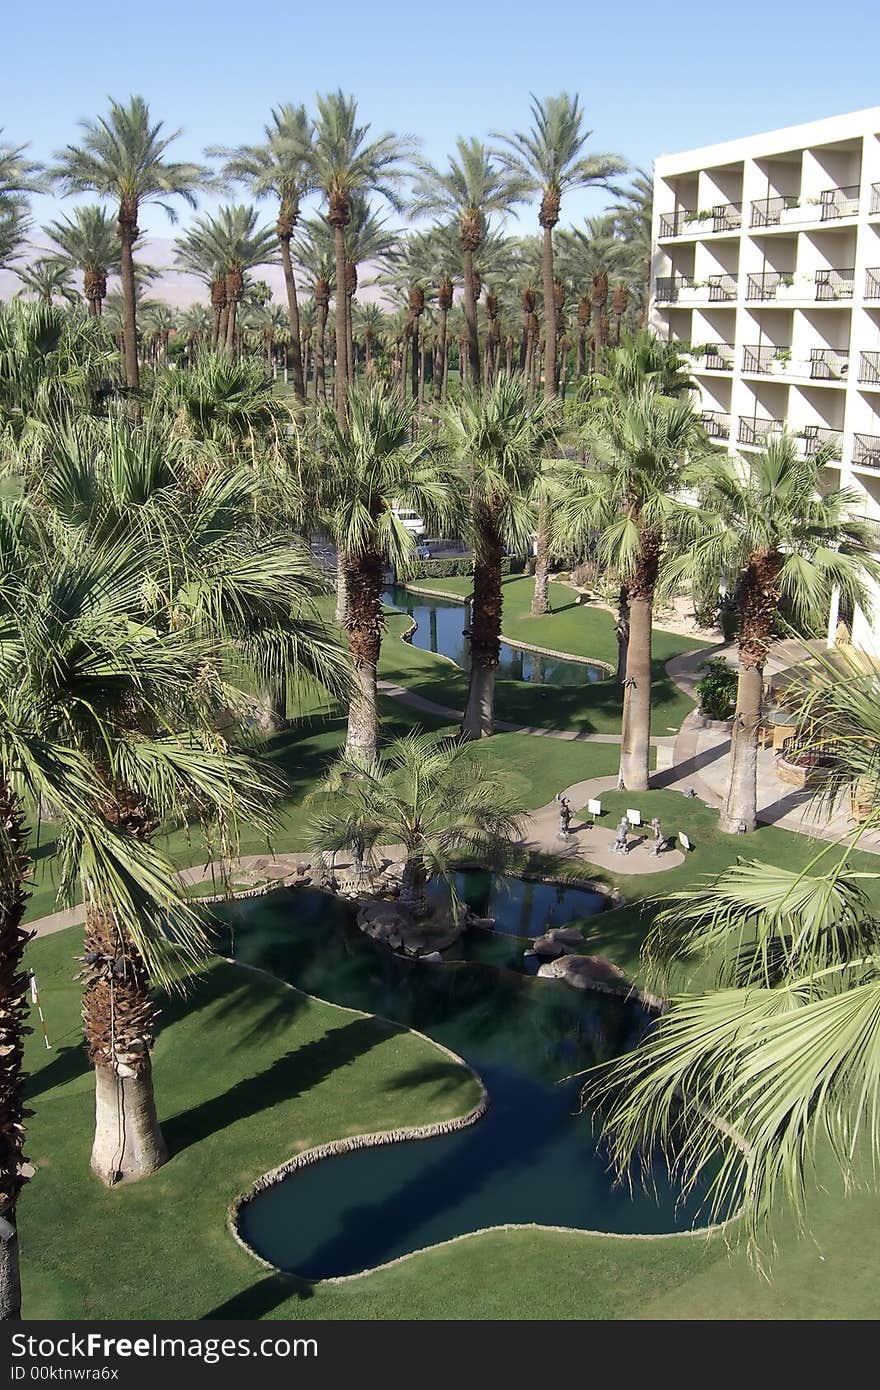 Resort in the desert with palm trees. Resort in the desert with palm trees